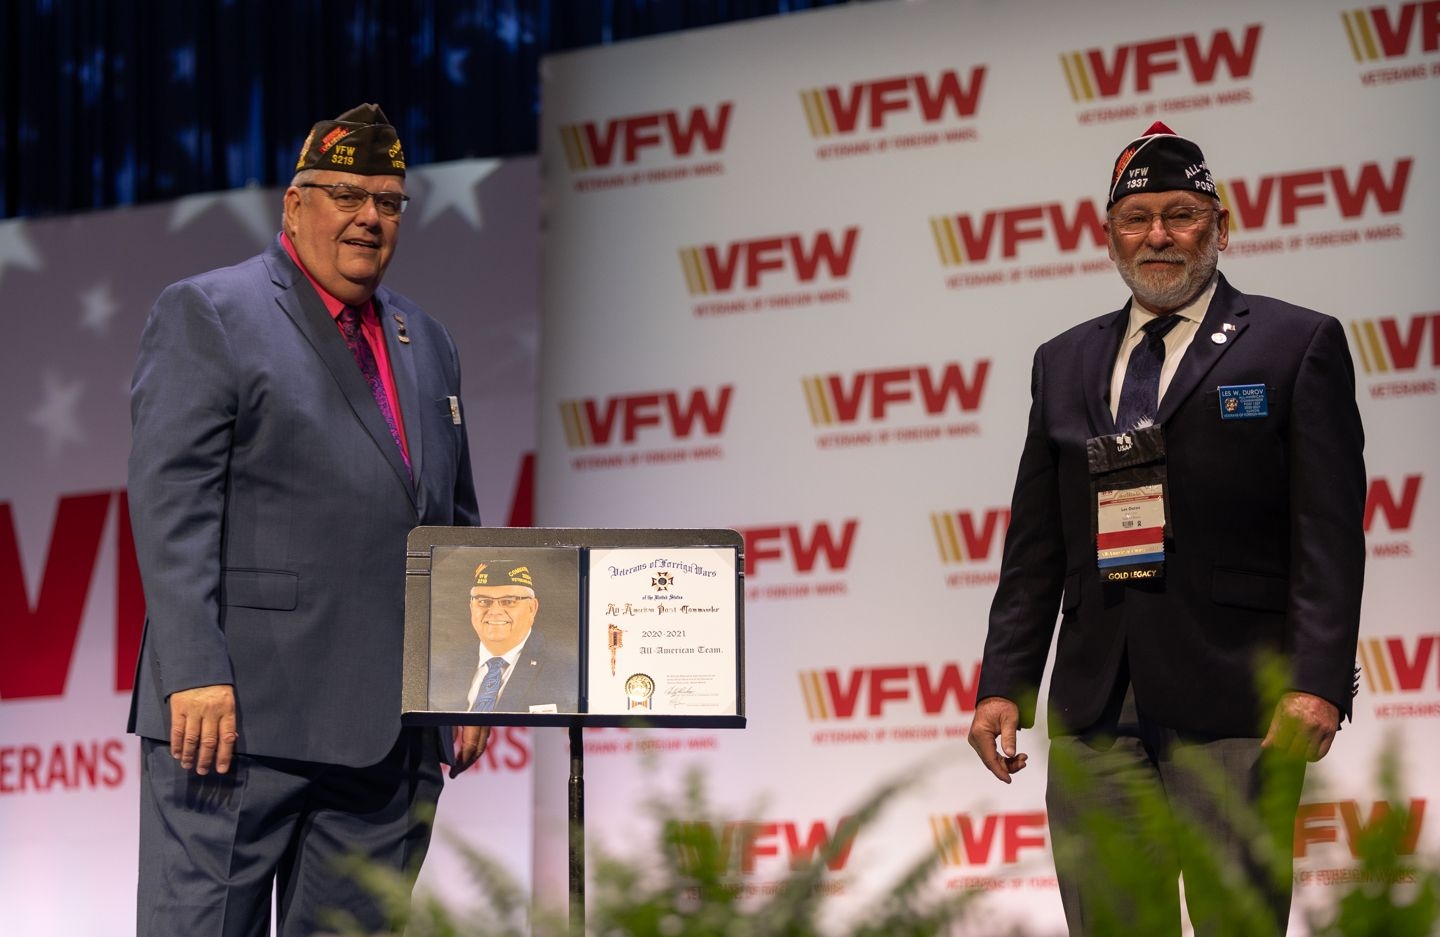 Veterans of Foreign Wars National Convention 30 July 3 August 2021 Kansas City Missouri. Illinois All American Commander receives recognition